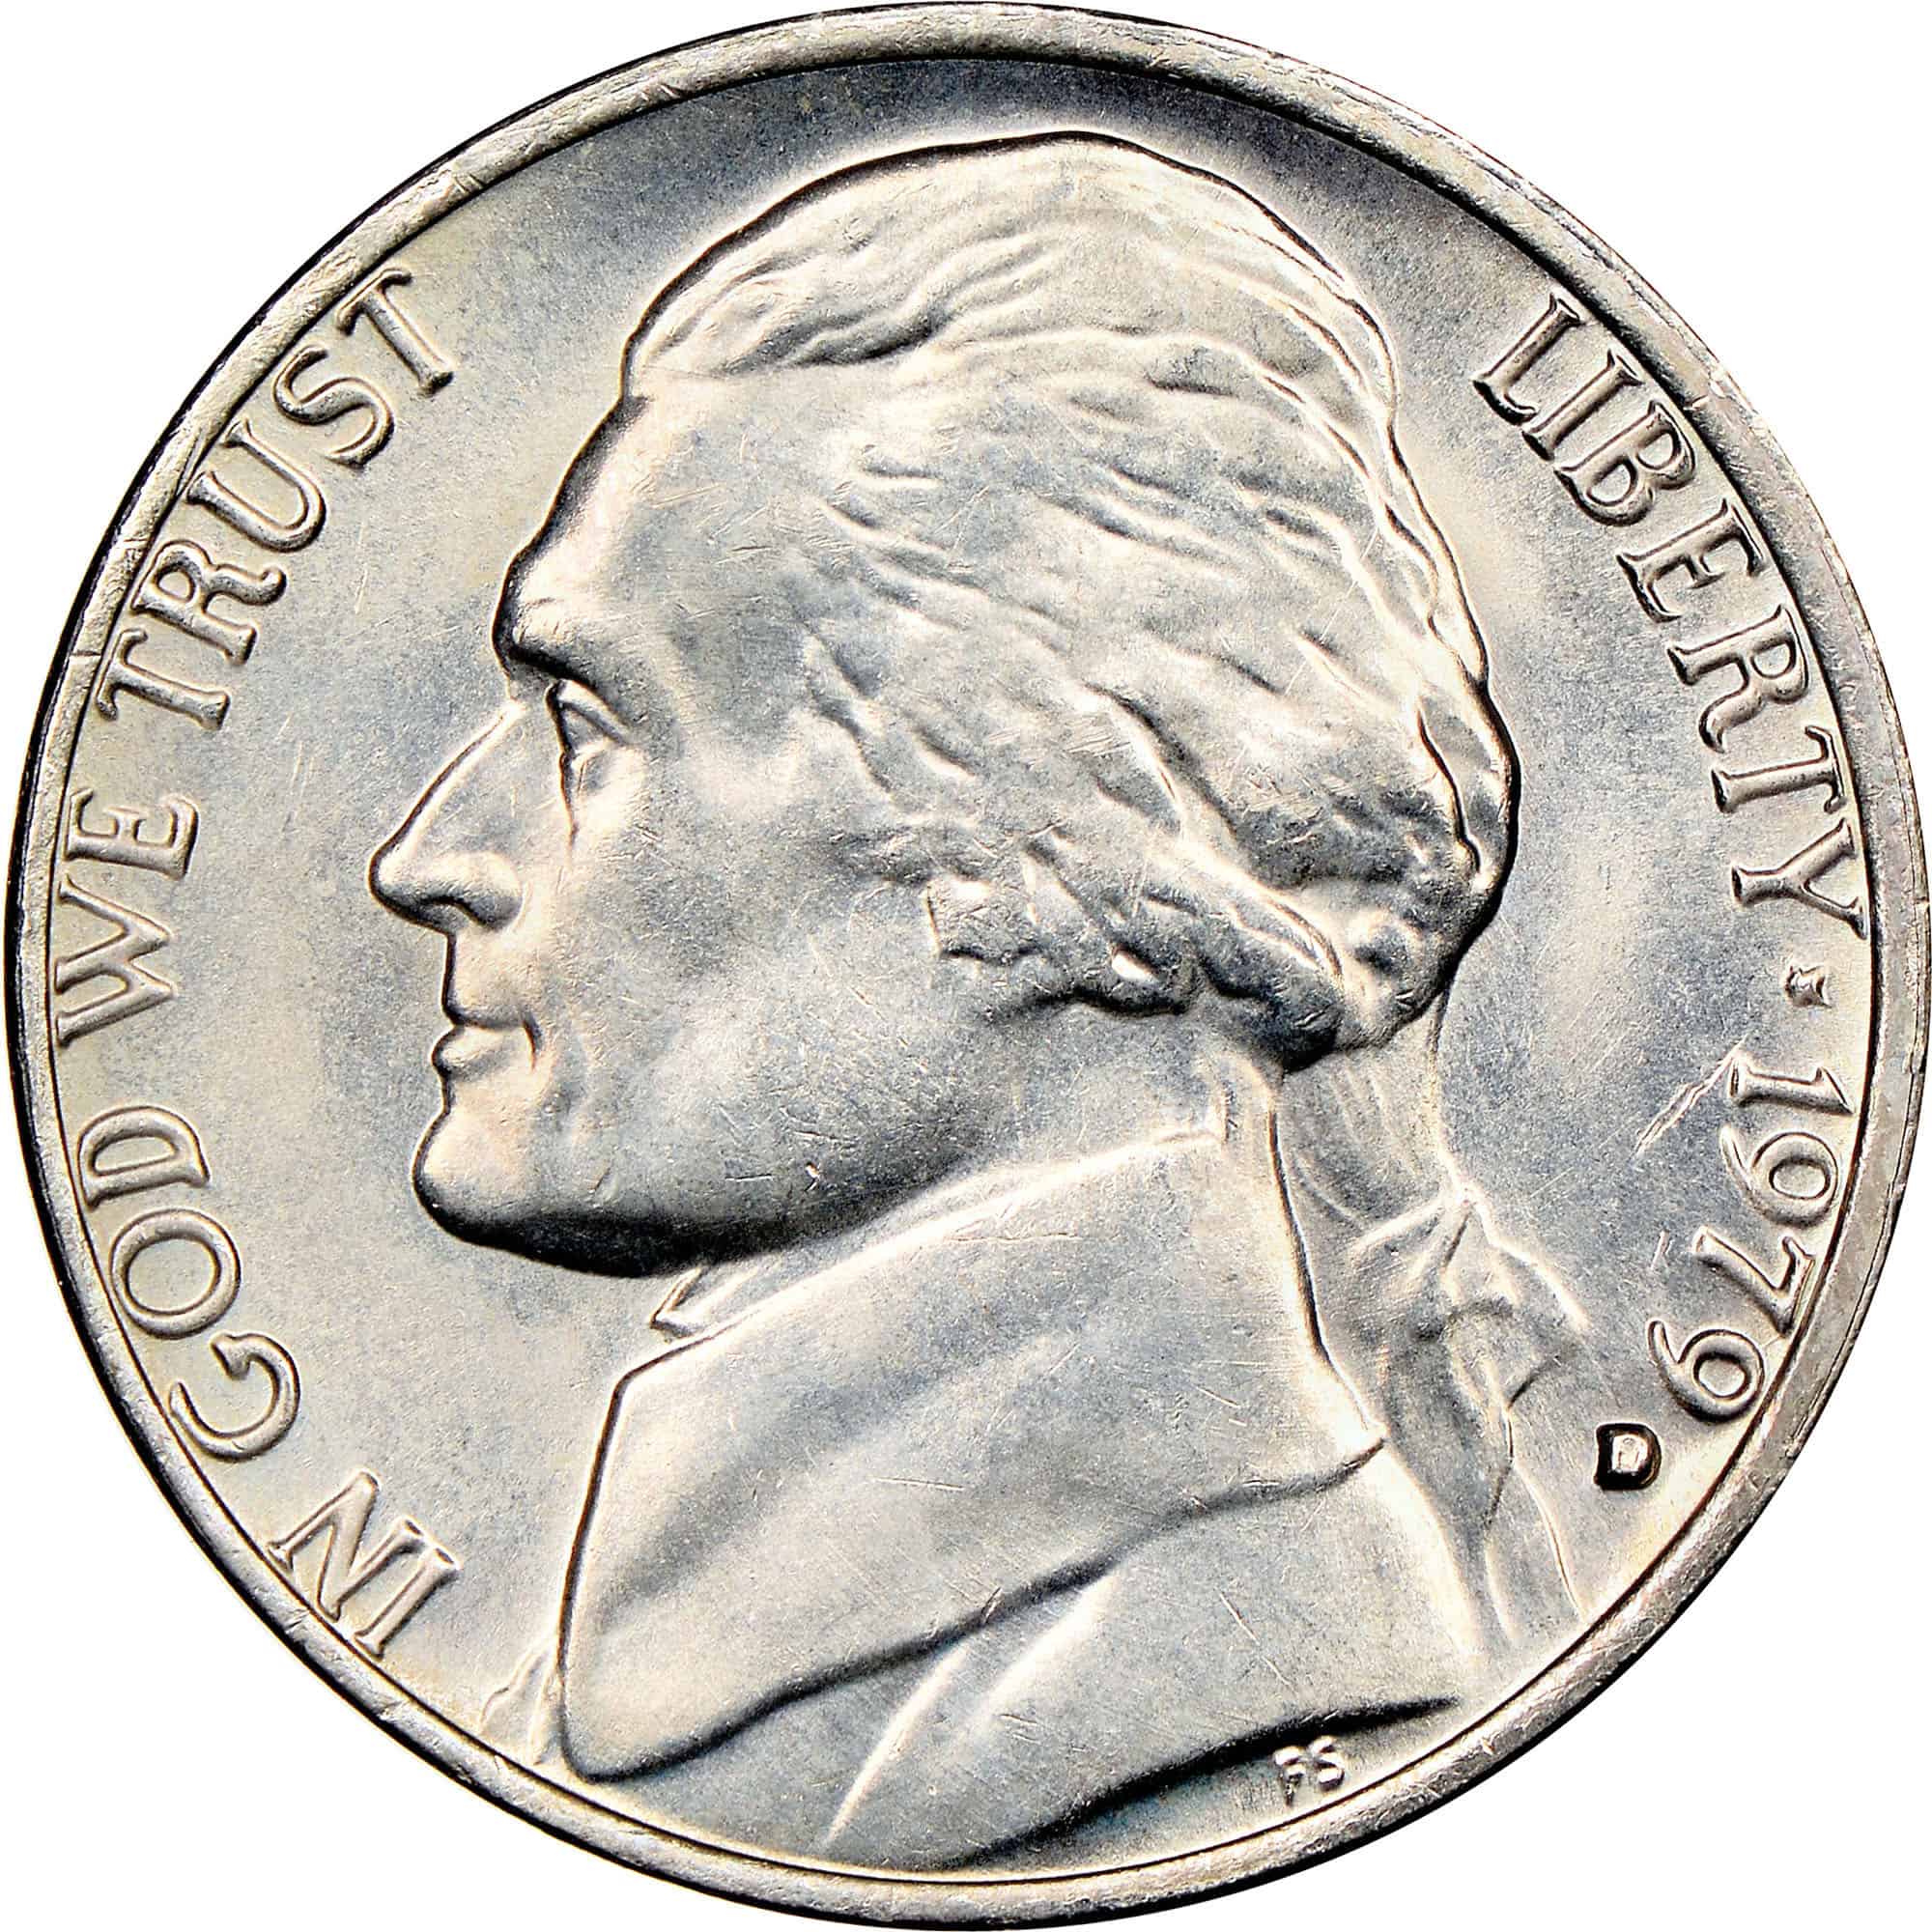 The obverse of the 1979 Jefferson nickel